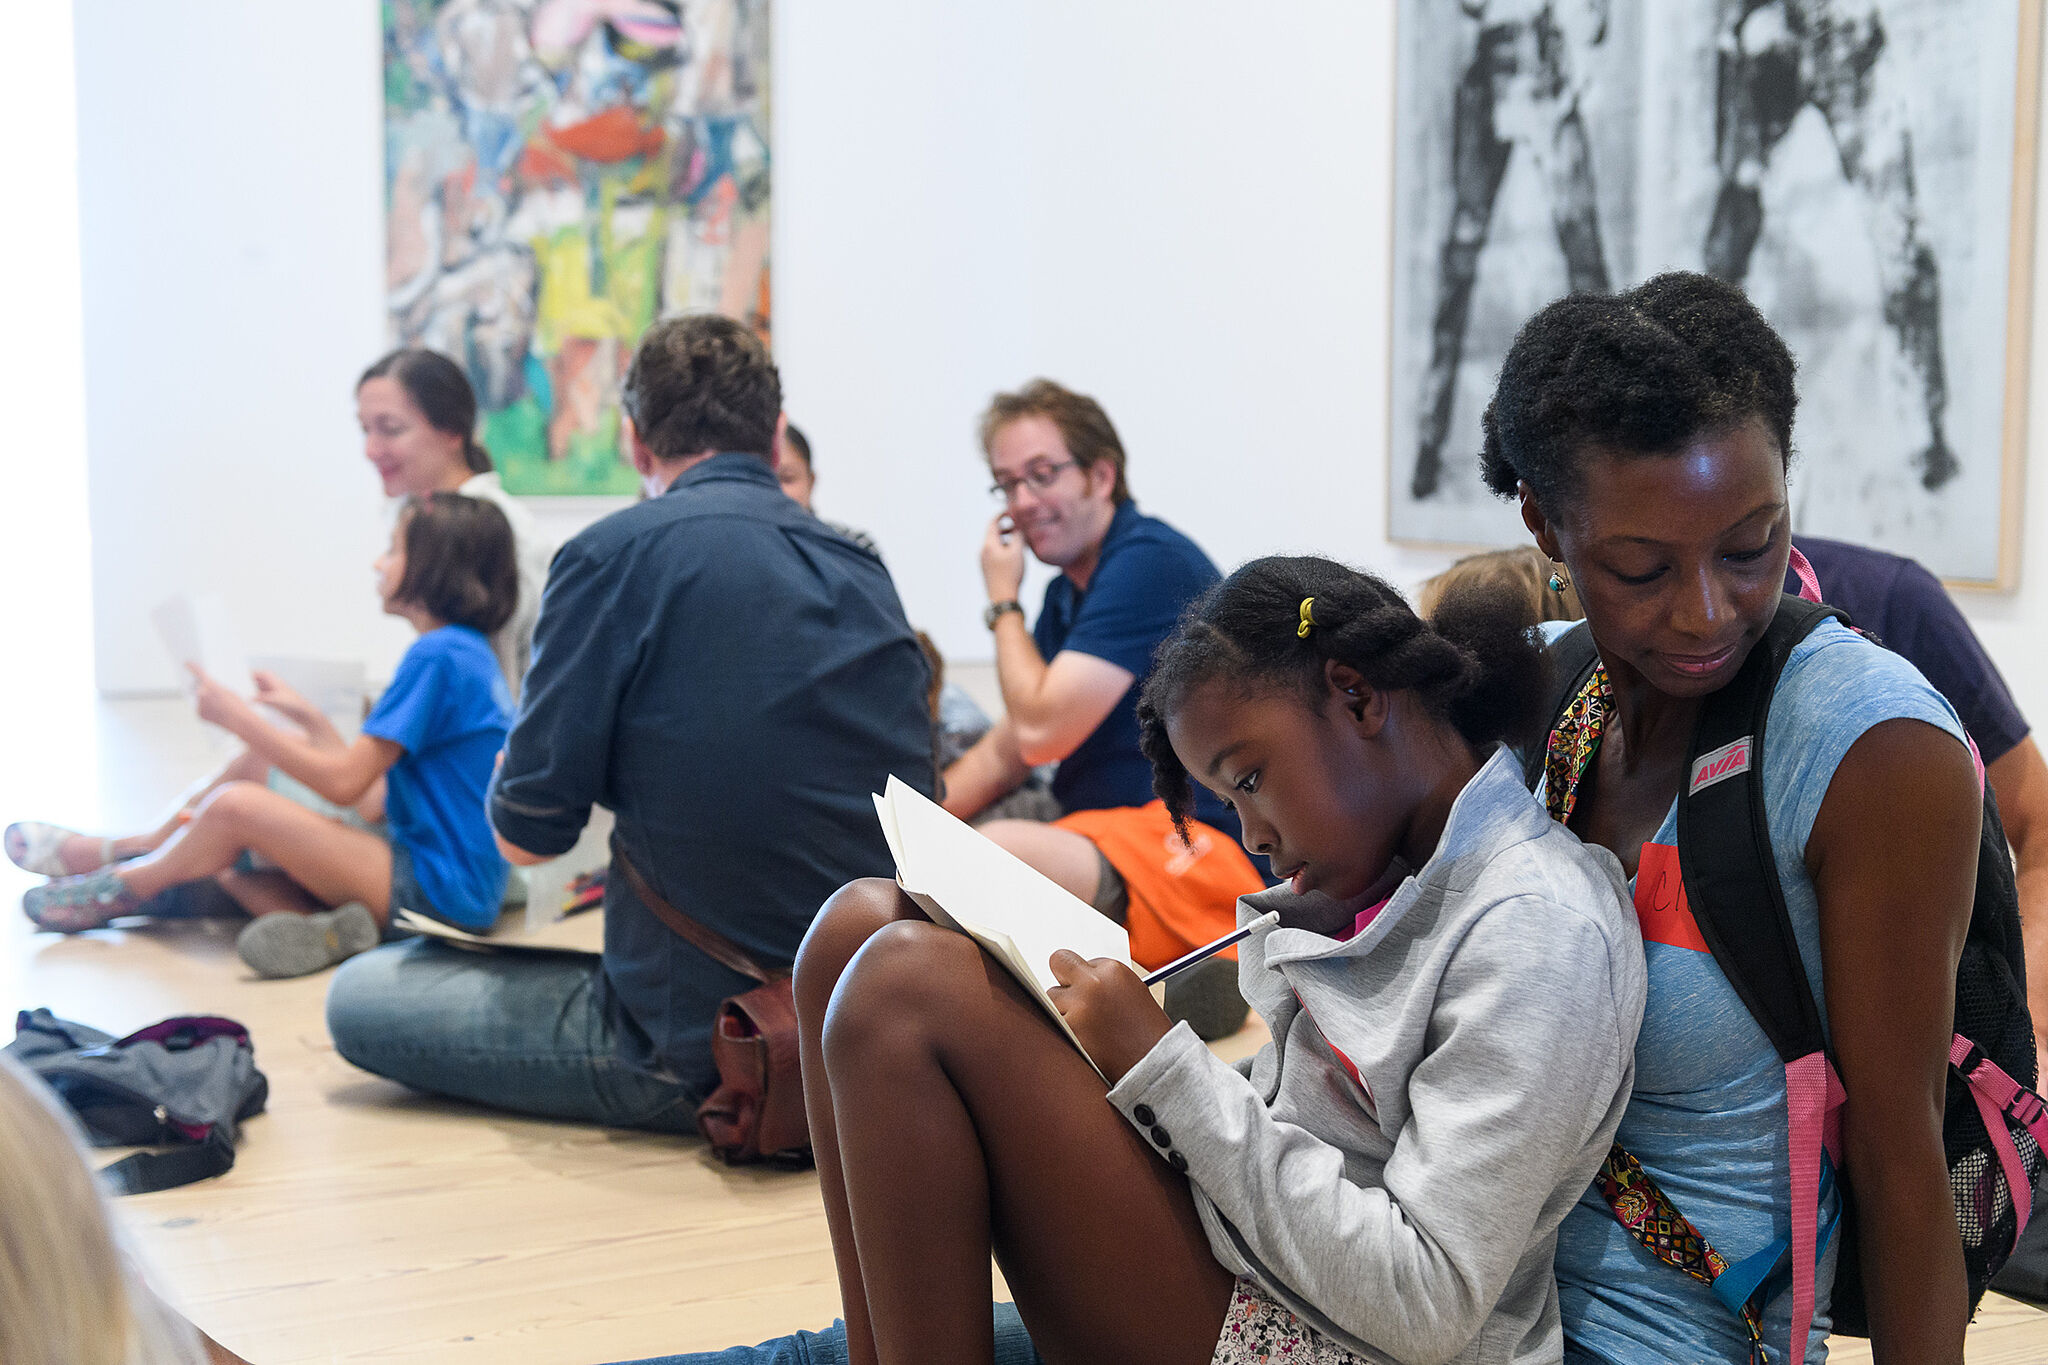 Families sketch together in the galleries